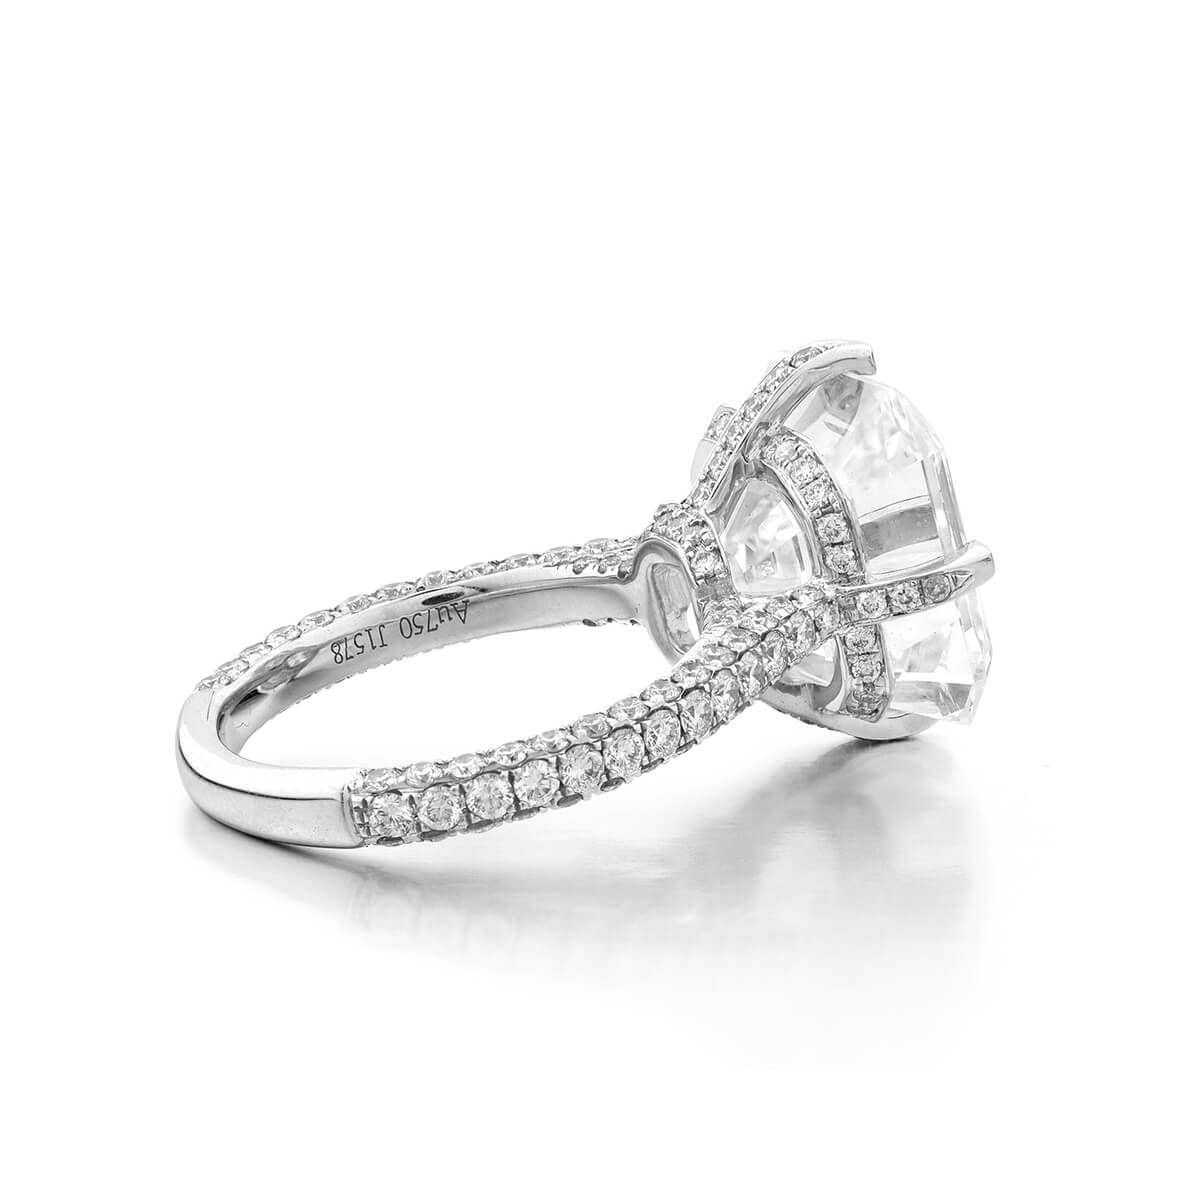  White Diamond Ring, 10.01 Ct. (11.12 Ct. TW), Asscher shape, GIA Certified, 5182900538